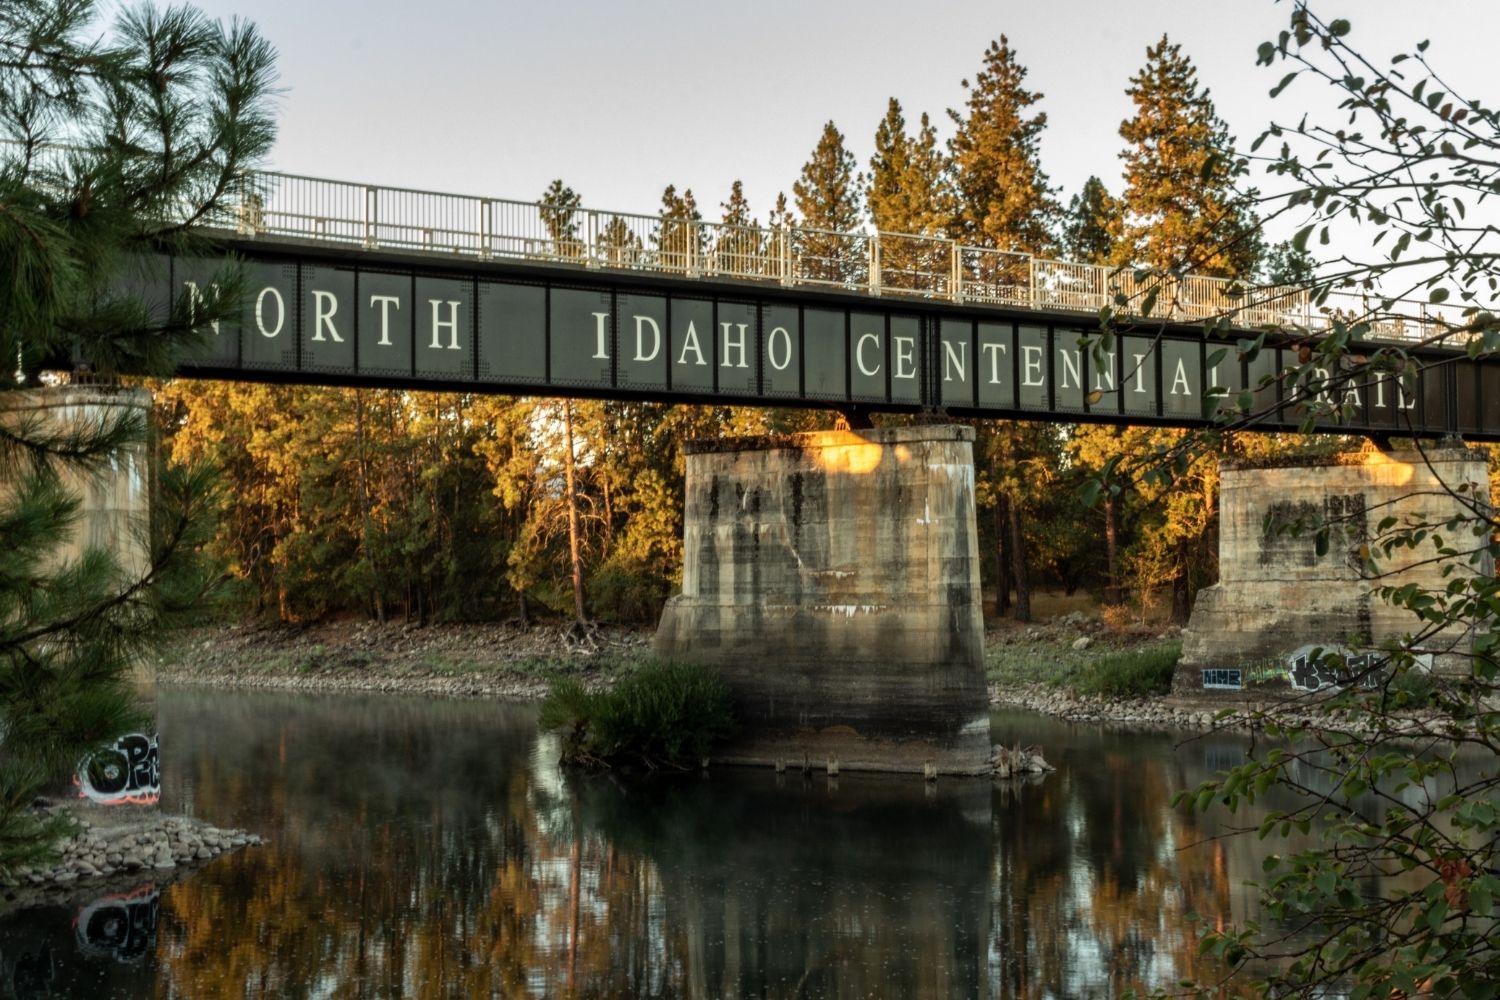 North Idaho Centennial Trail: Everything you need to know!